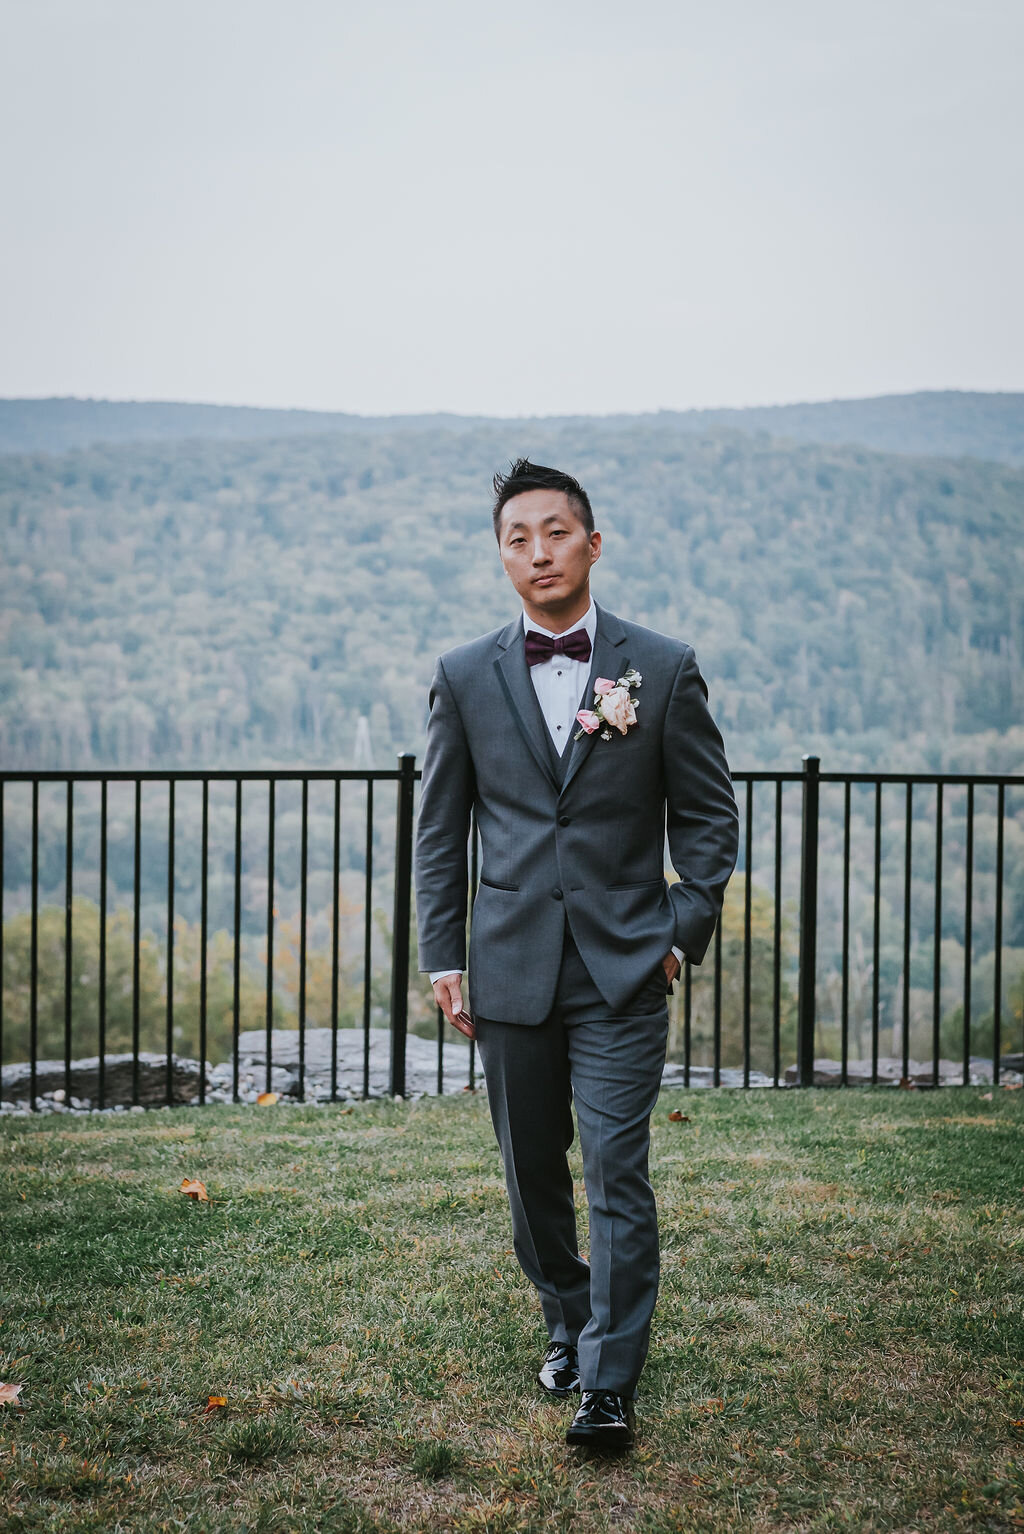 Helen and Tim celebrated their fall wedding overlooking the mountains at the beautiful Pennsylvania Wedding Venue, Stroudsmoor Country Inn. Photographed by Wandermore Photography